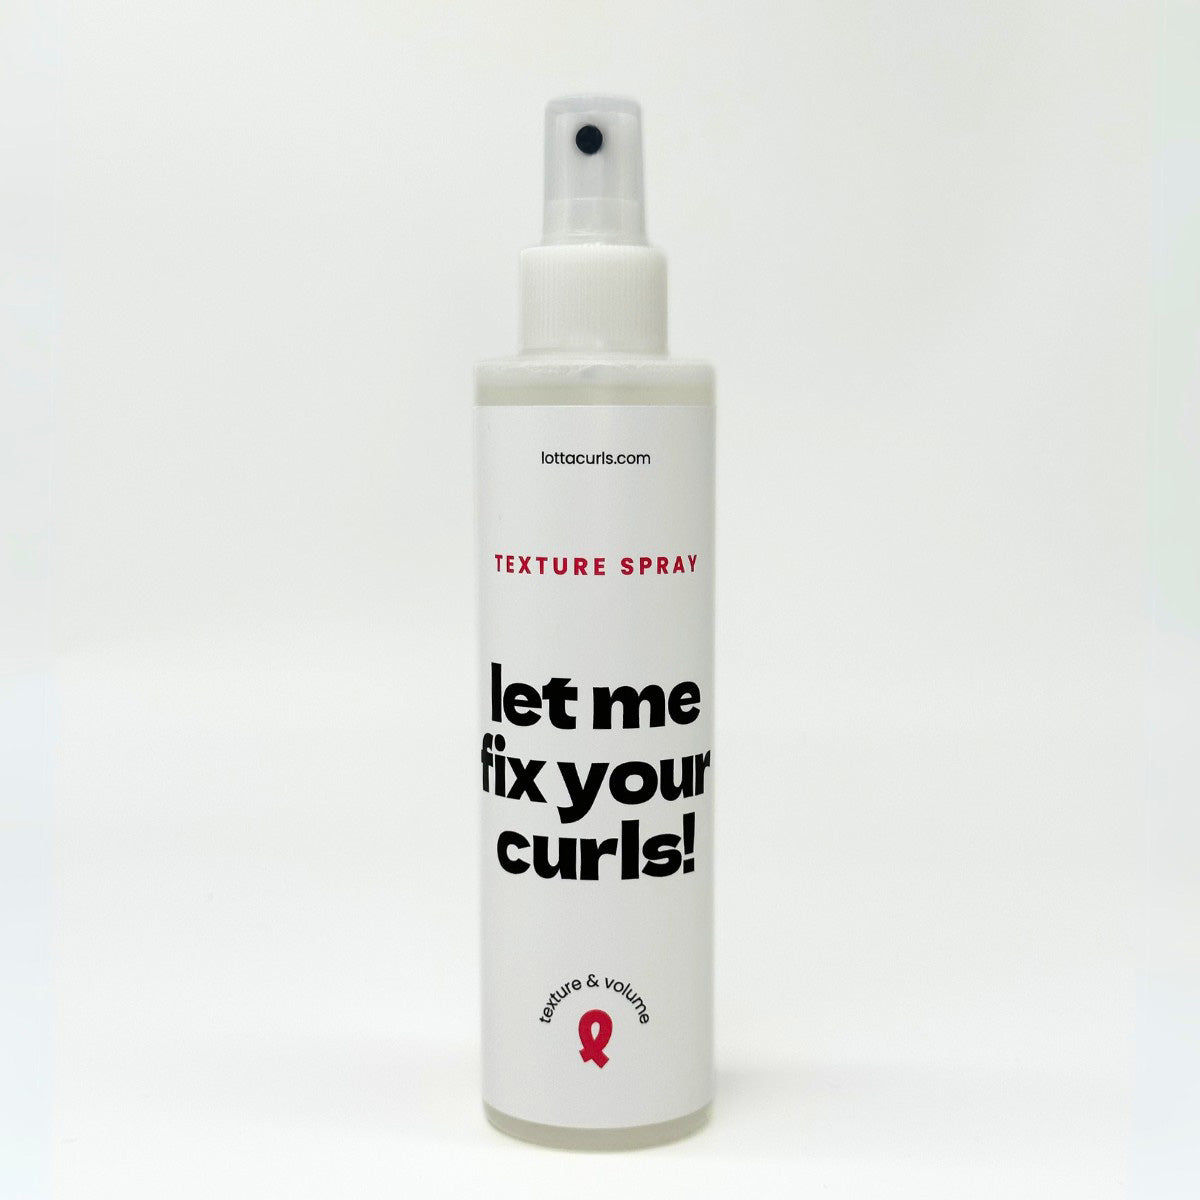 Texture spray for long-lasting curls